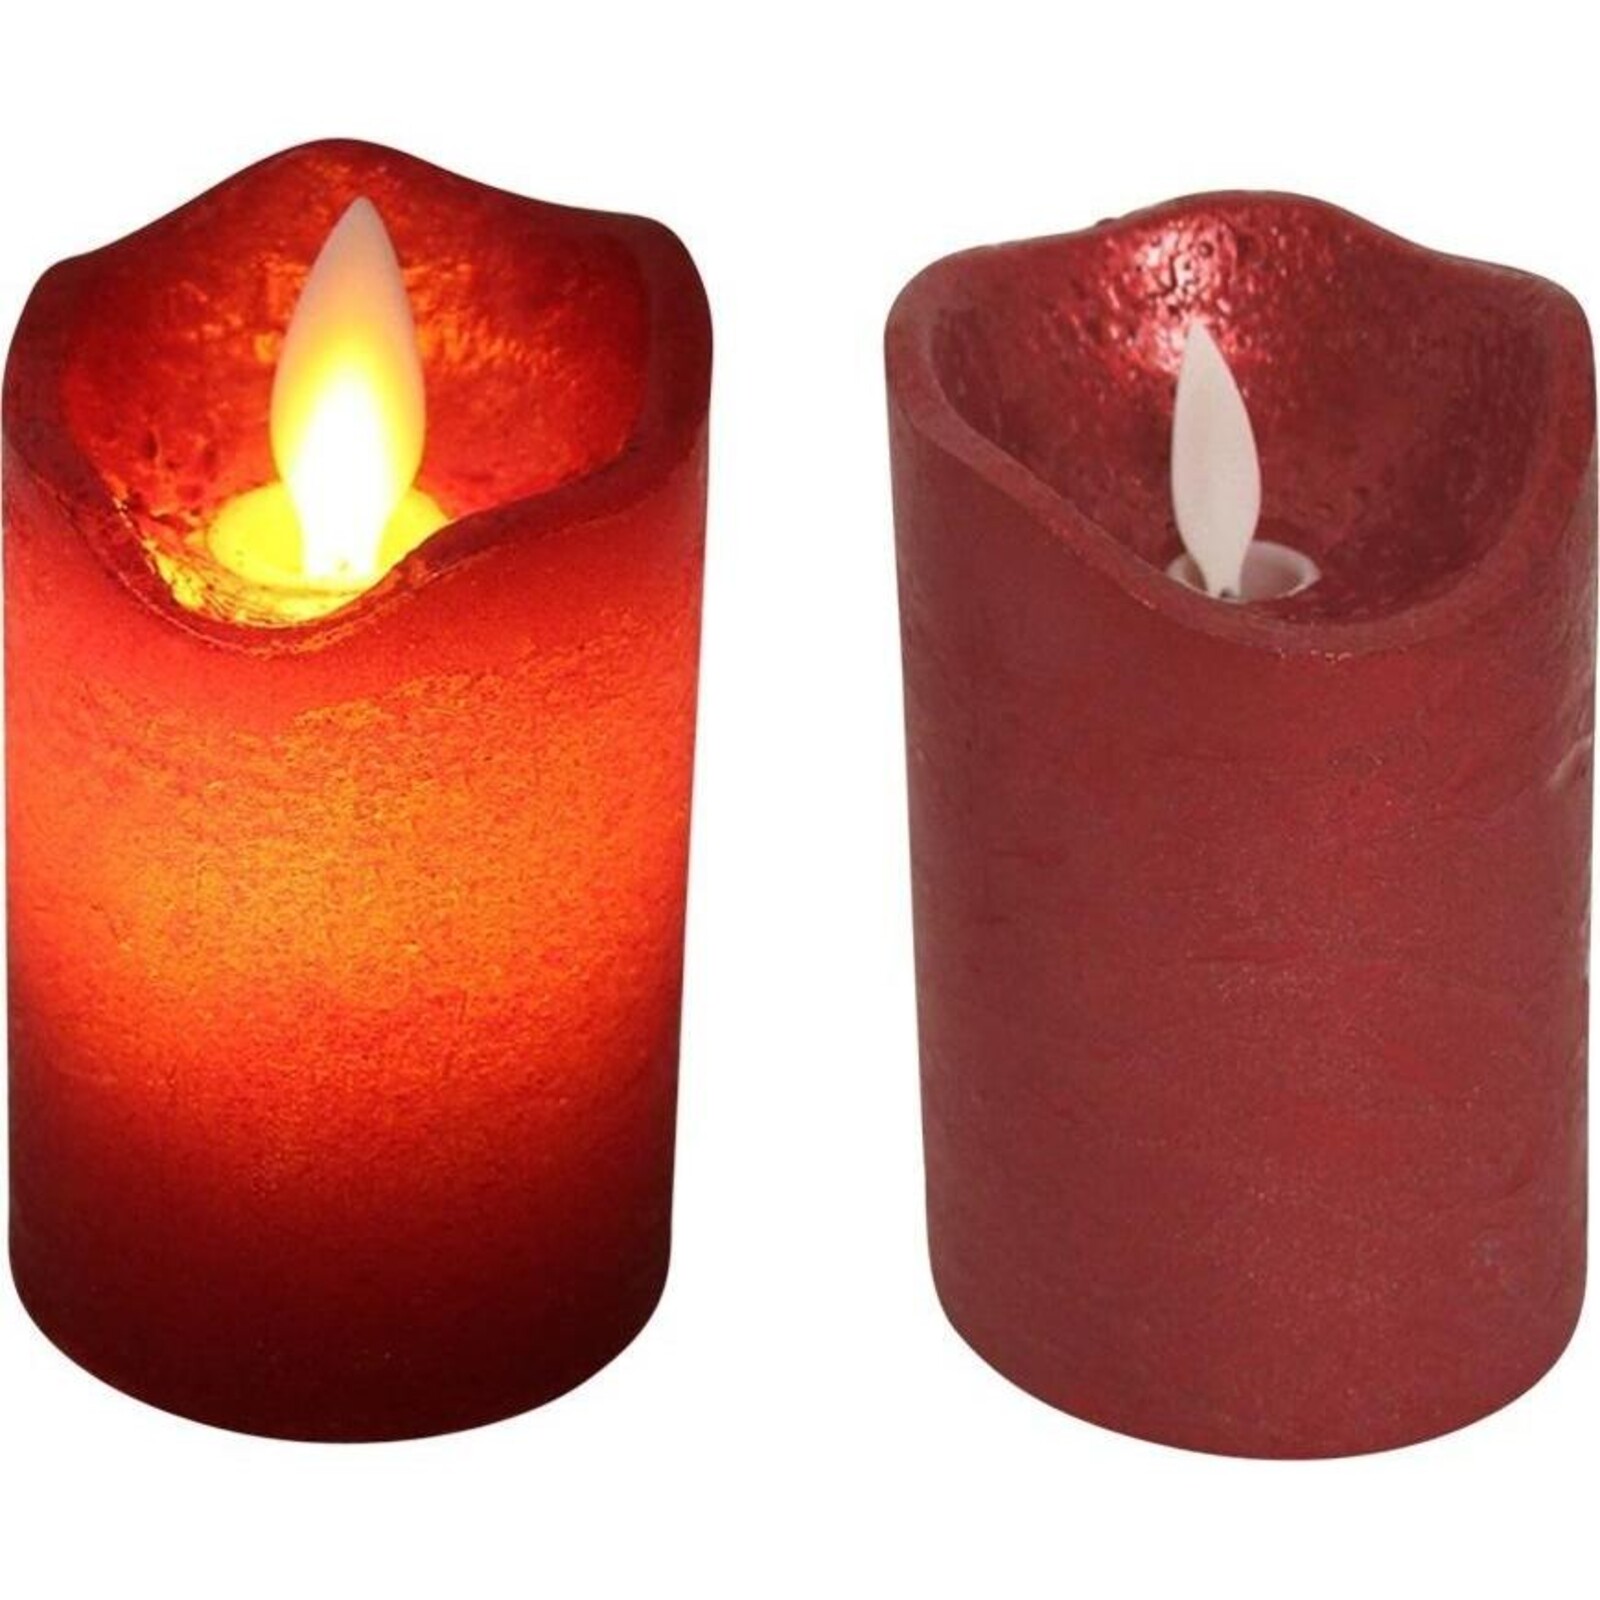 Battery Candle Red Sml